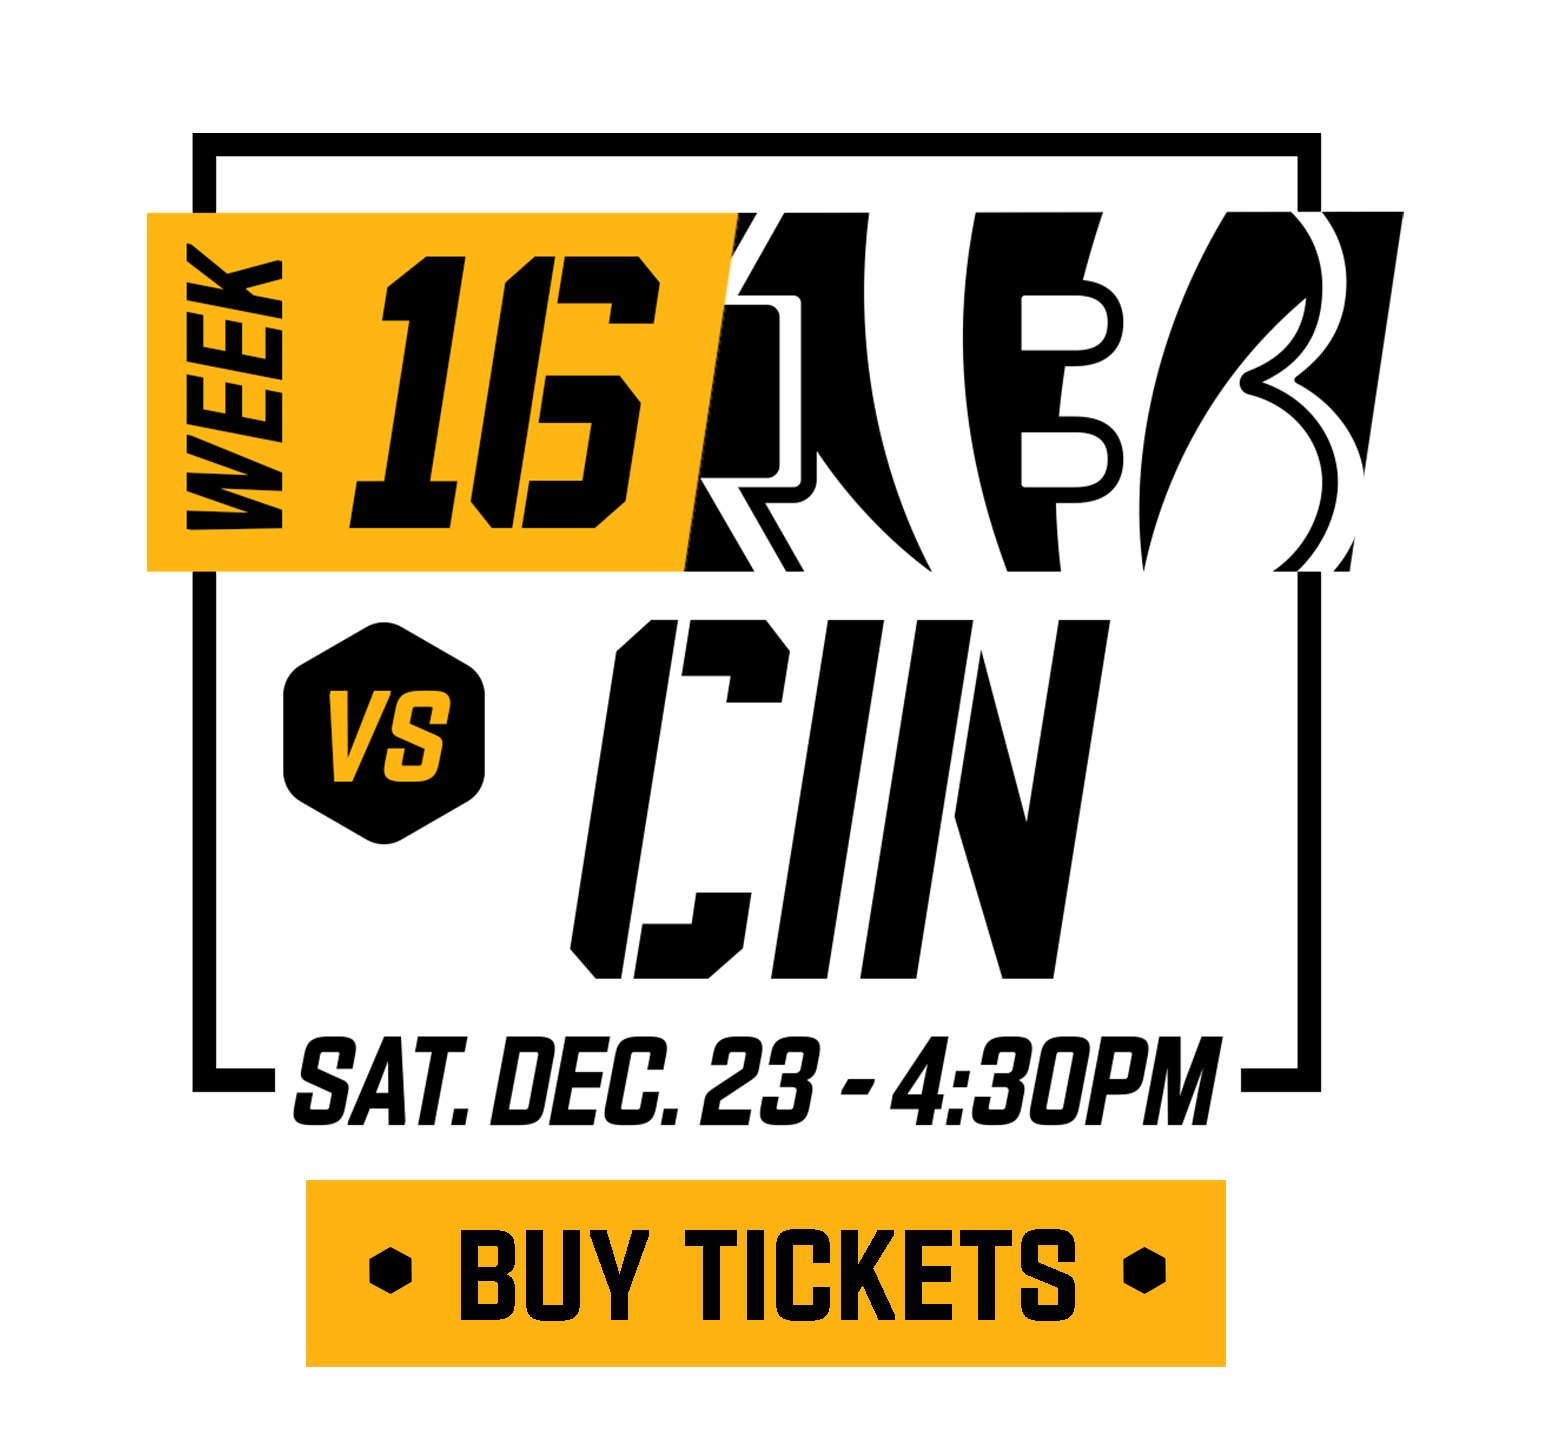 steelers tickets cost